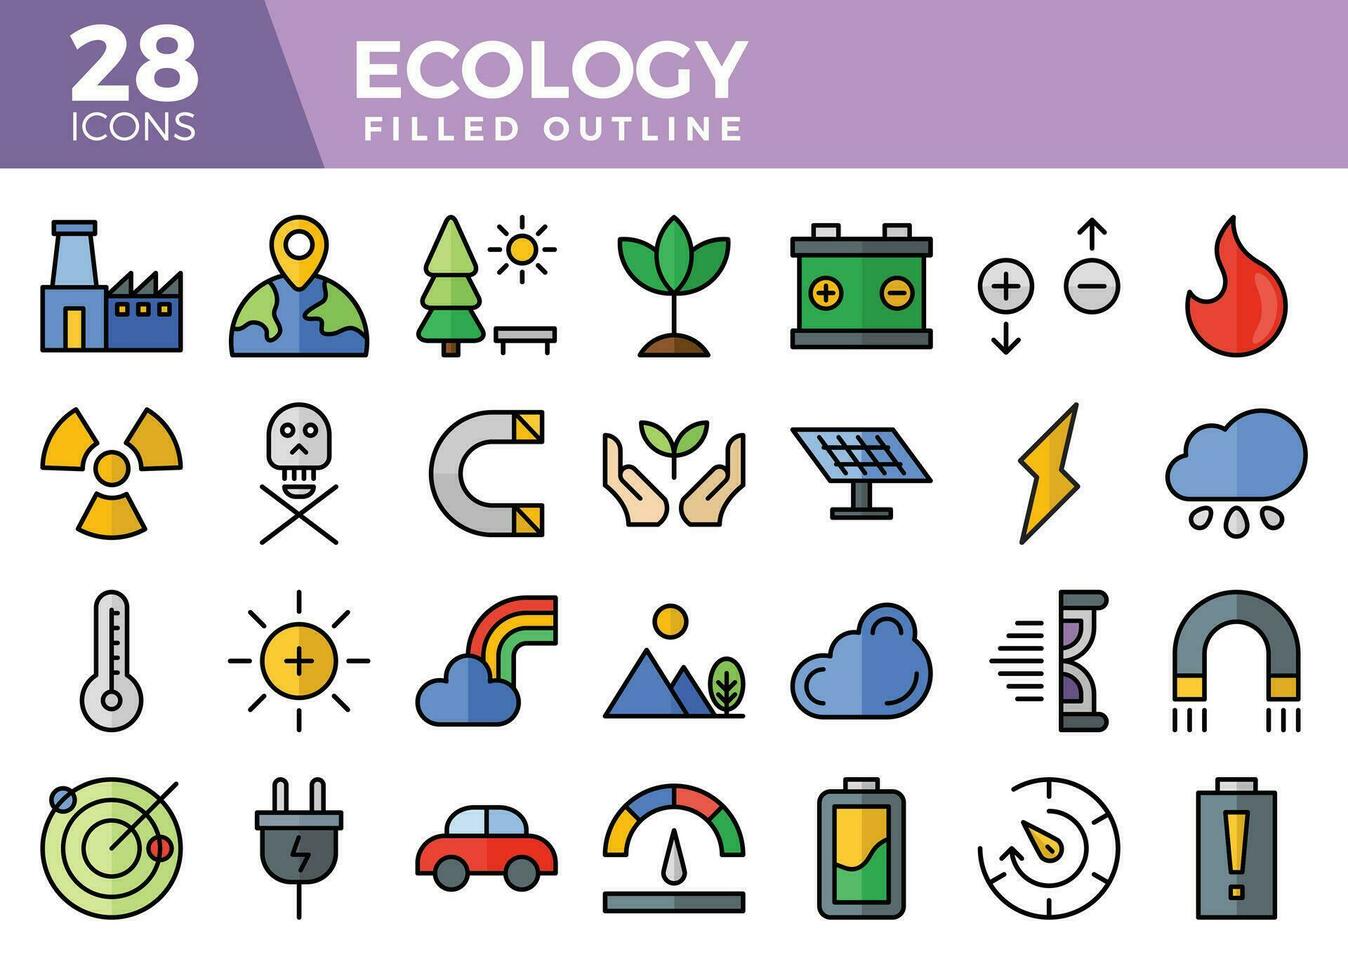 Ecology filled outline icons set. The collections include for web design ,app design, UI design,business and finance ,network and communications and other vector